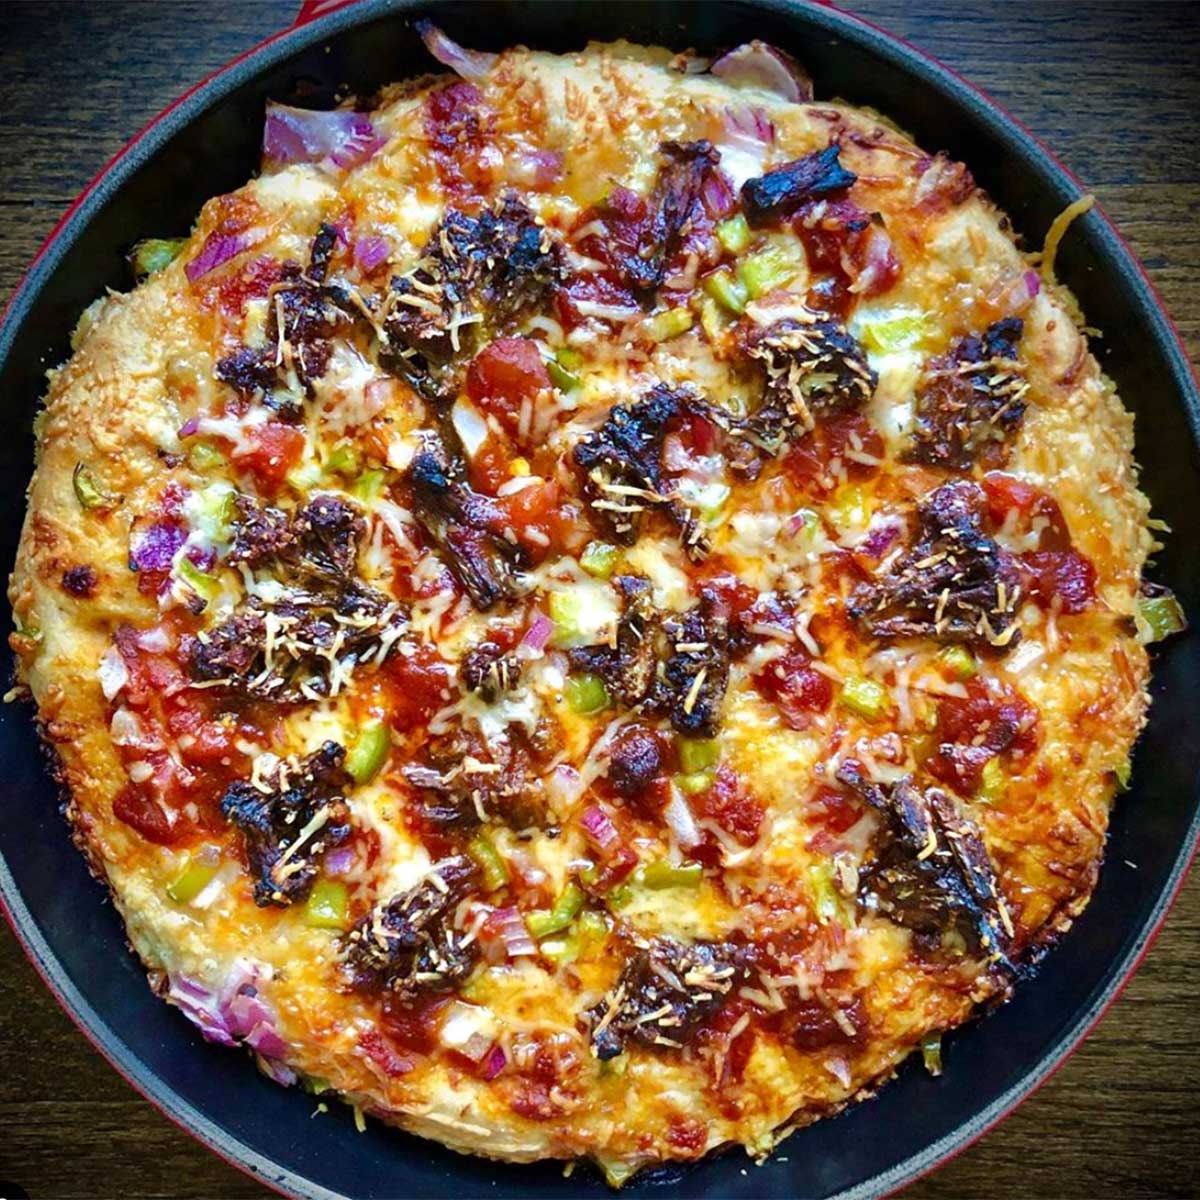 Baked pizza in cast iron skilled